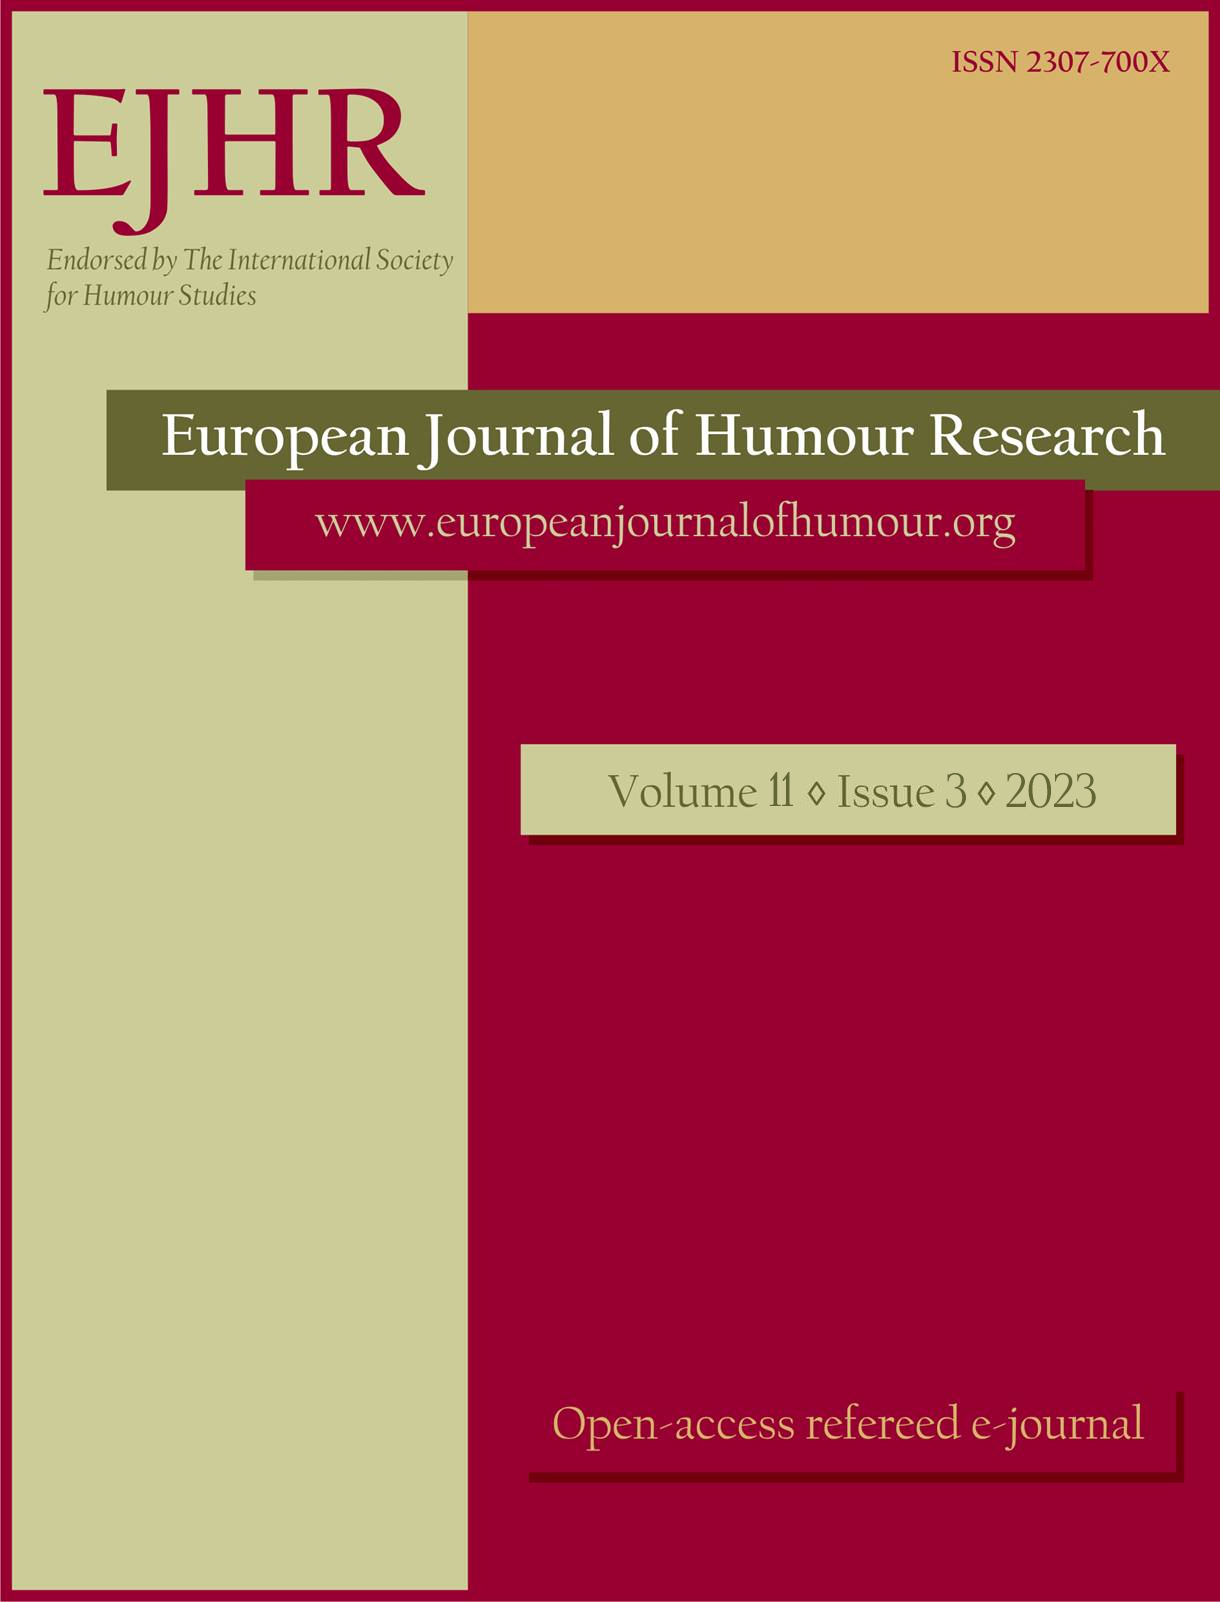 Factor invariance of the Humor Styles Questionnaire
and its relationship with the HEXACO personality
model in a Spanish community sample